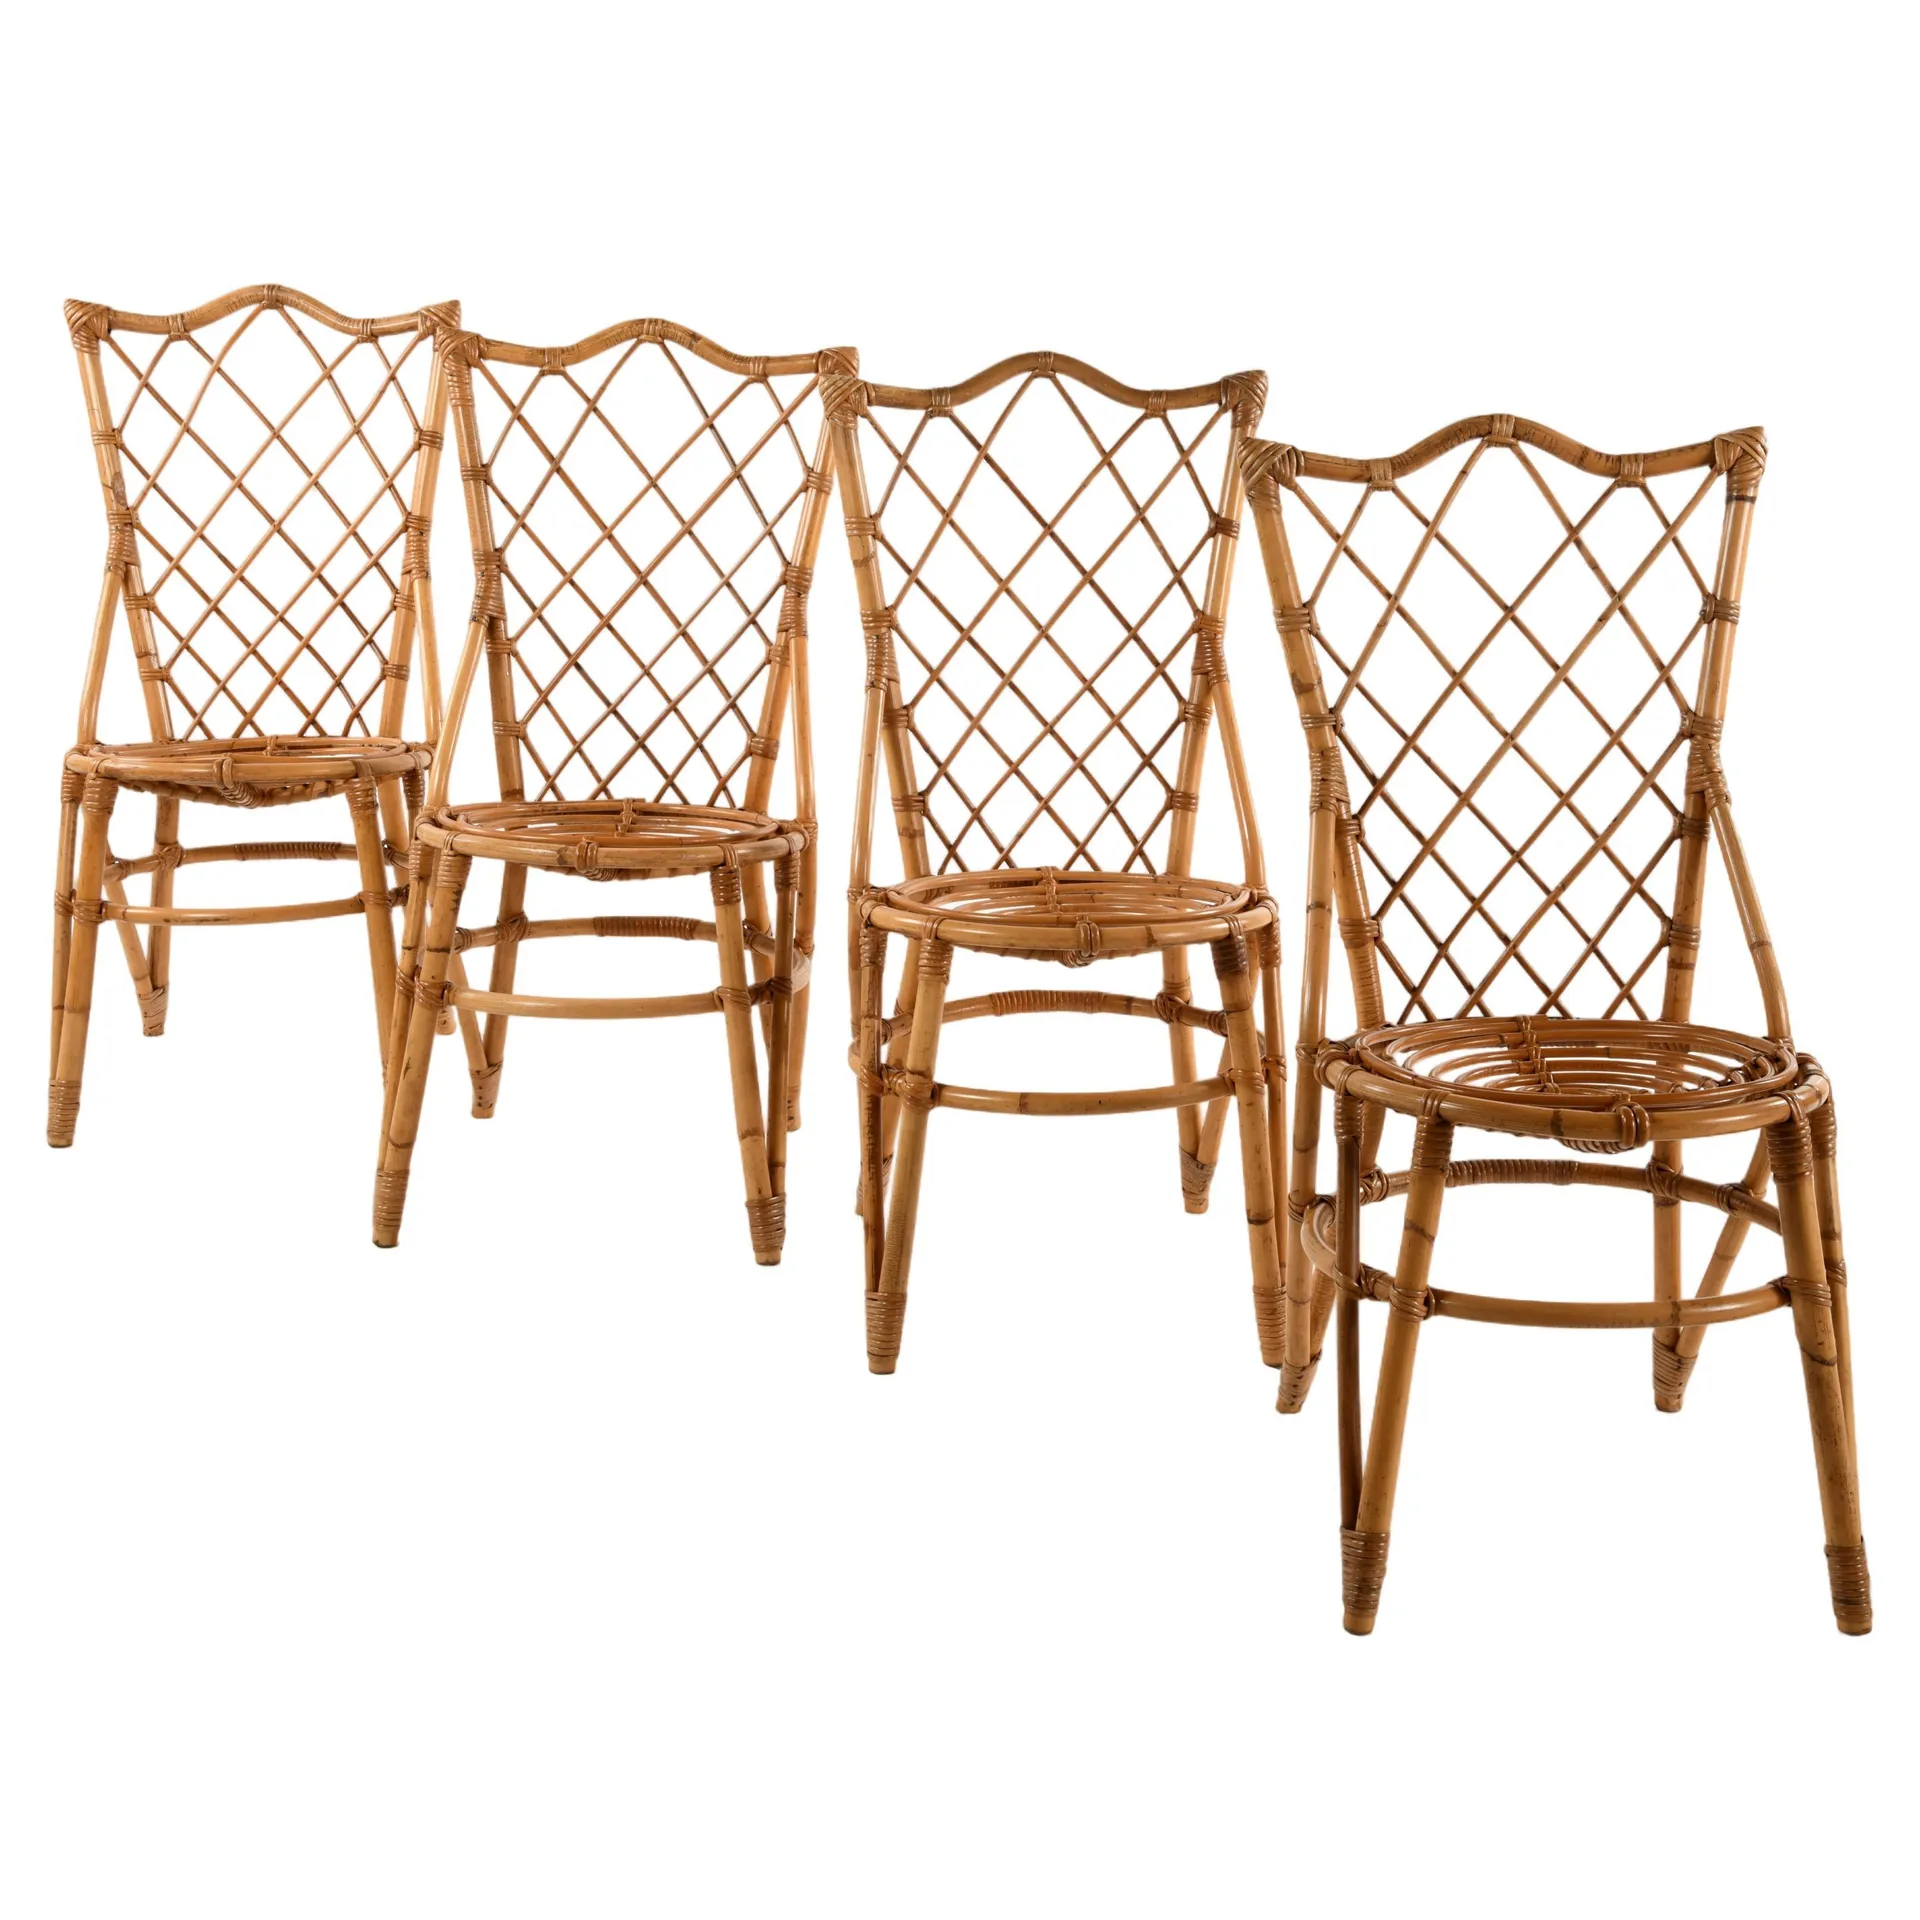 4 bamboo and rattan chairs Louis Sognot style from the French Riviera, 1960s